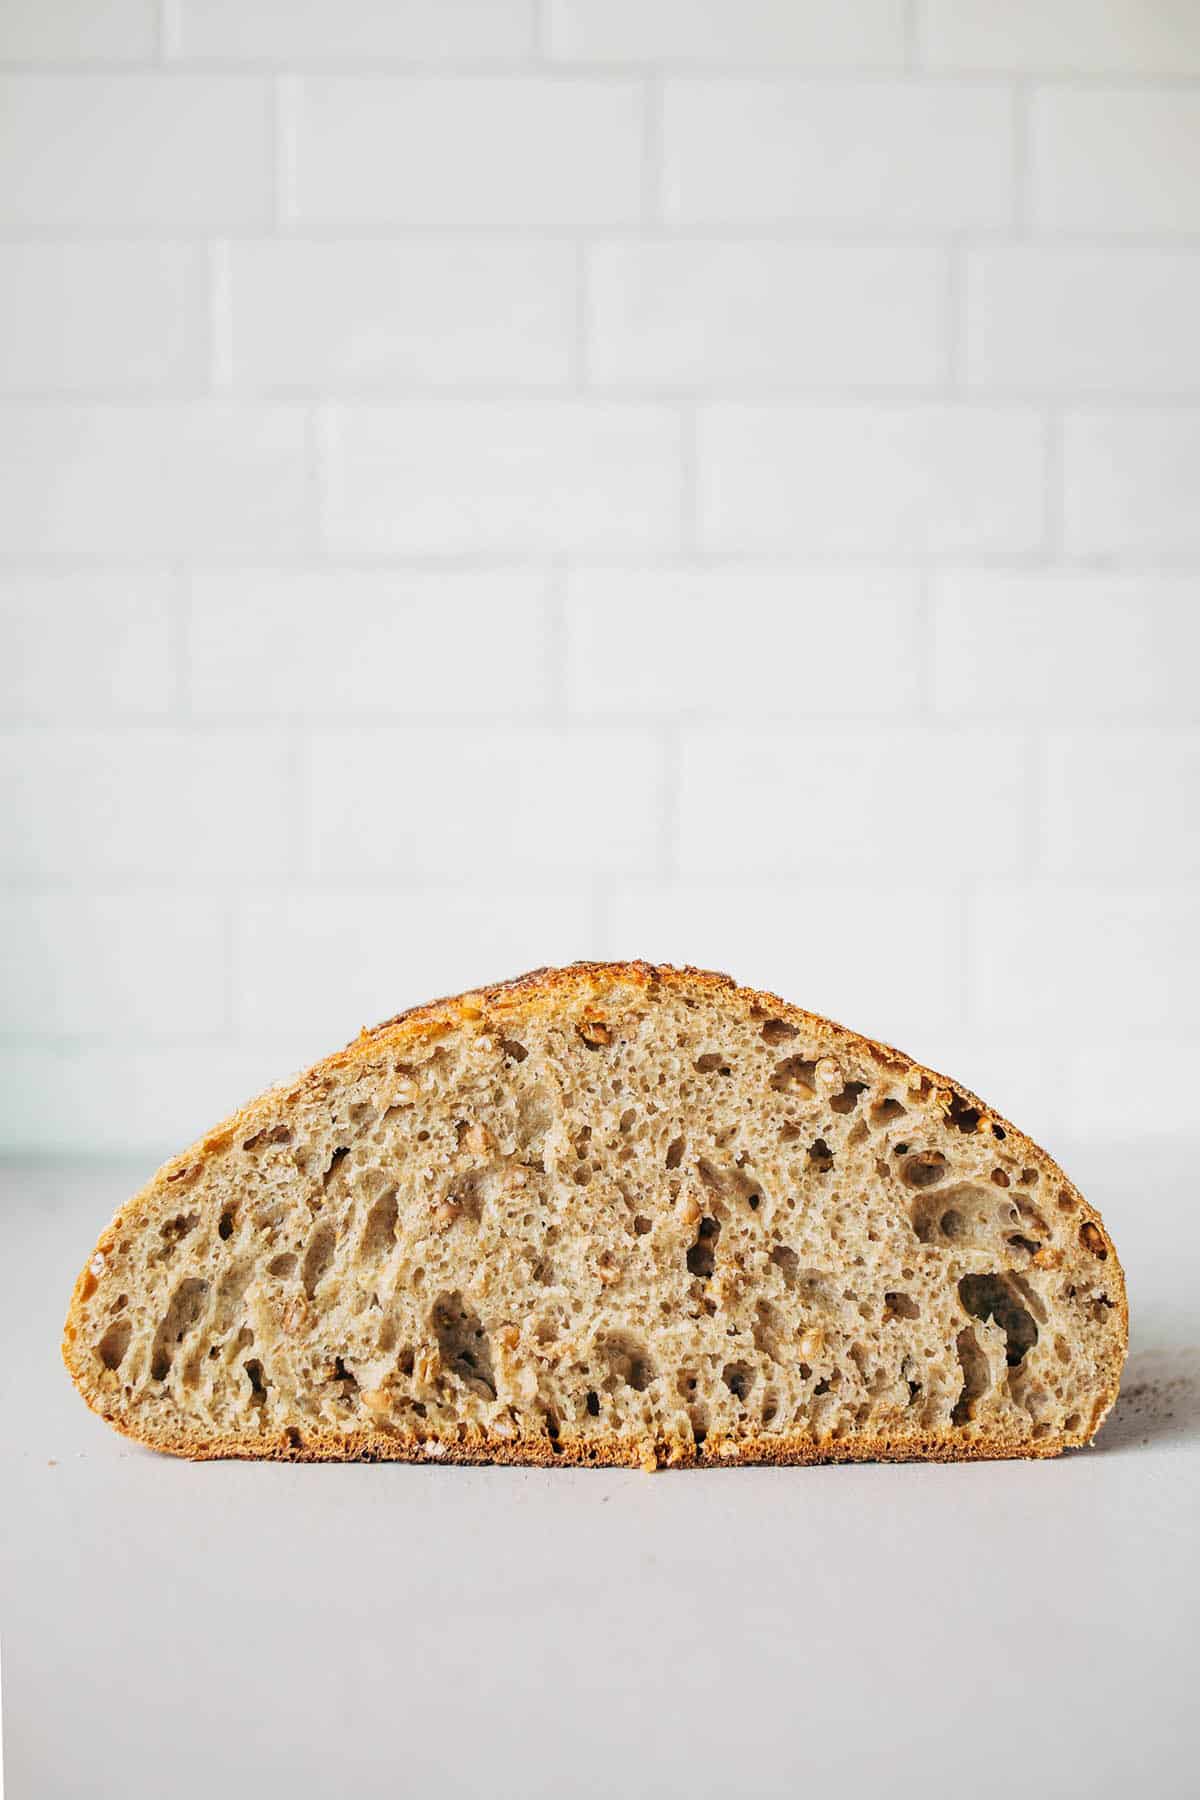 A loaf of sourdough bread, halved to show the interior crumb.